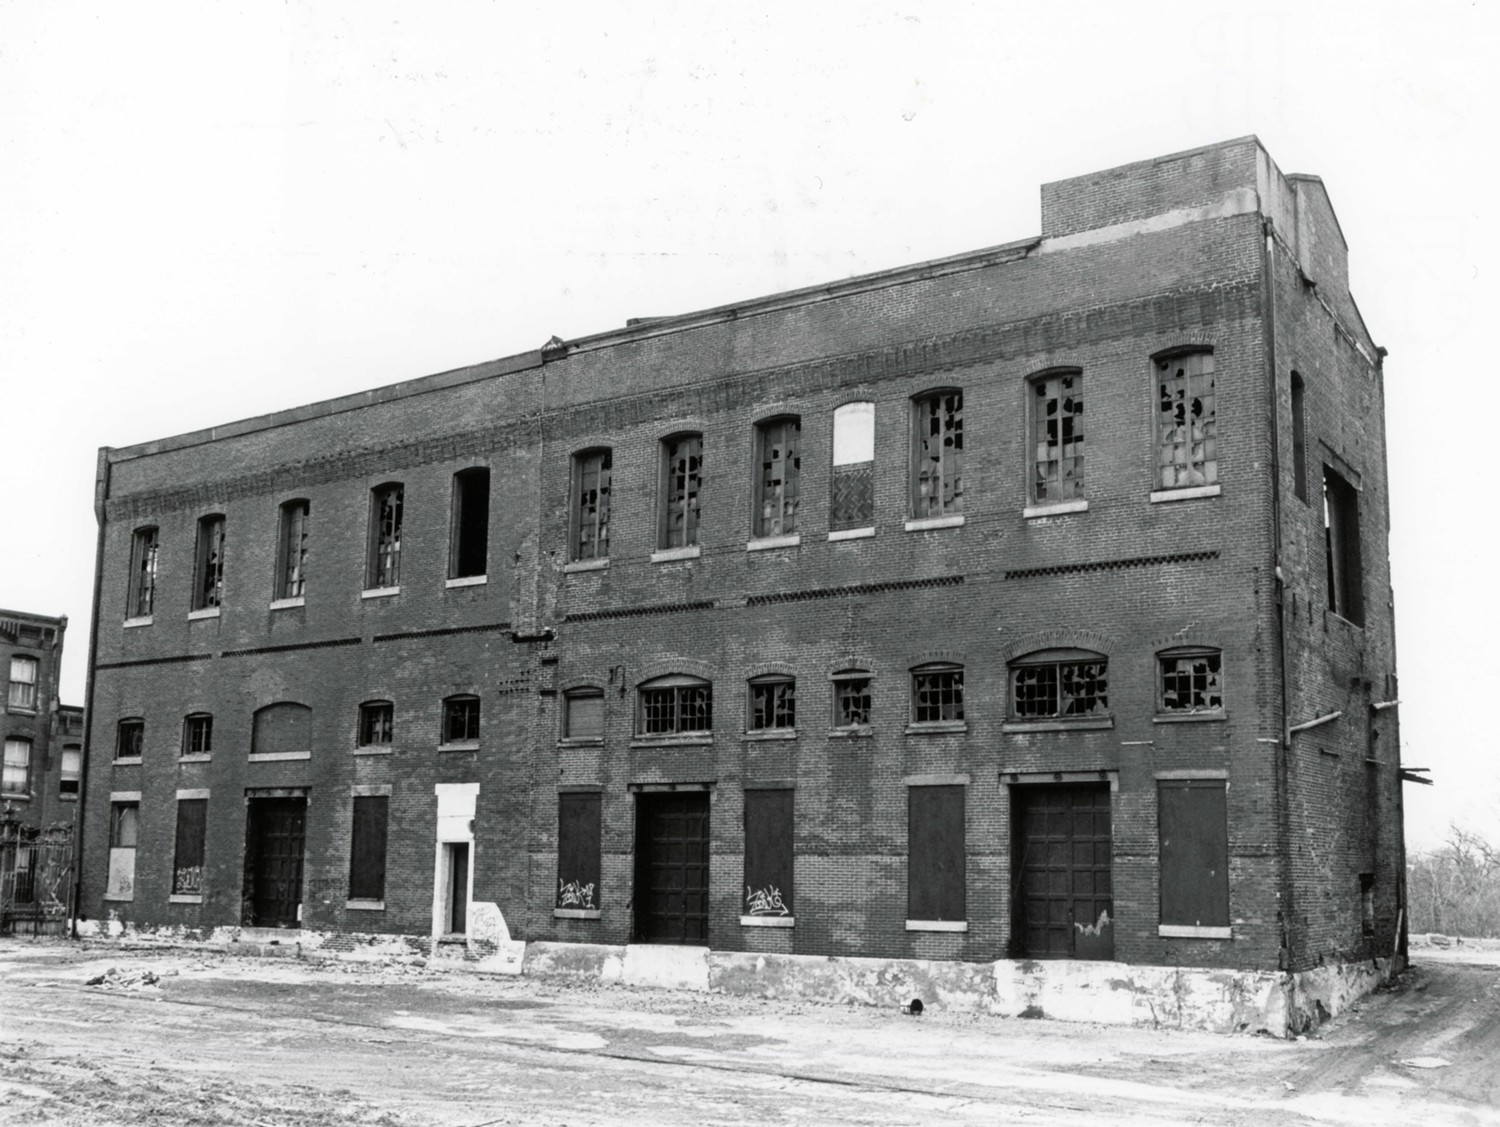 Bergdoll Brewery - City Park Brewery, Philadelphia Pennsylvania Looking south at the Parrish Street elevations of Bldgs. #3B and 3A (1979)